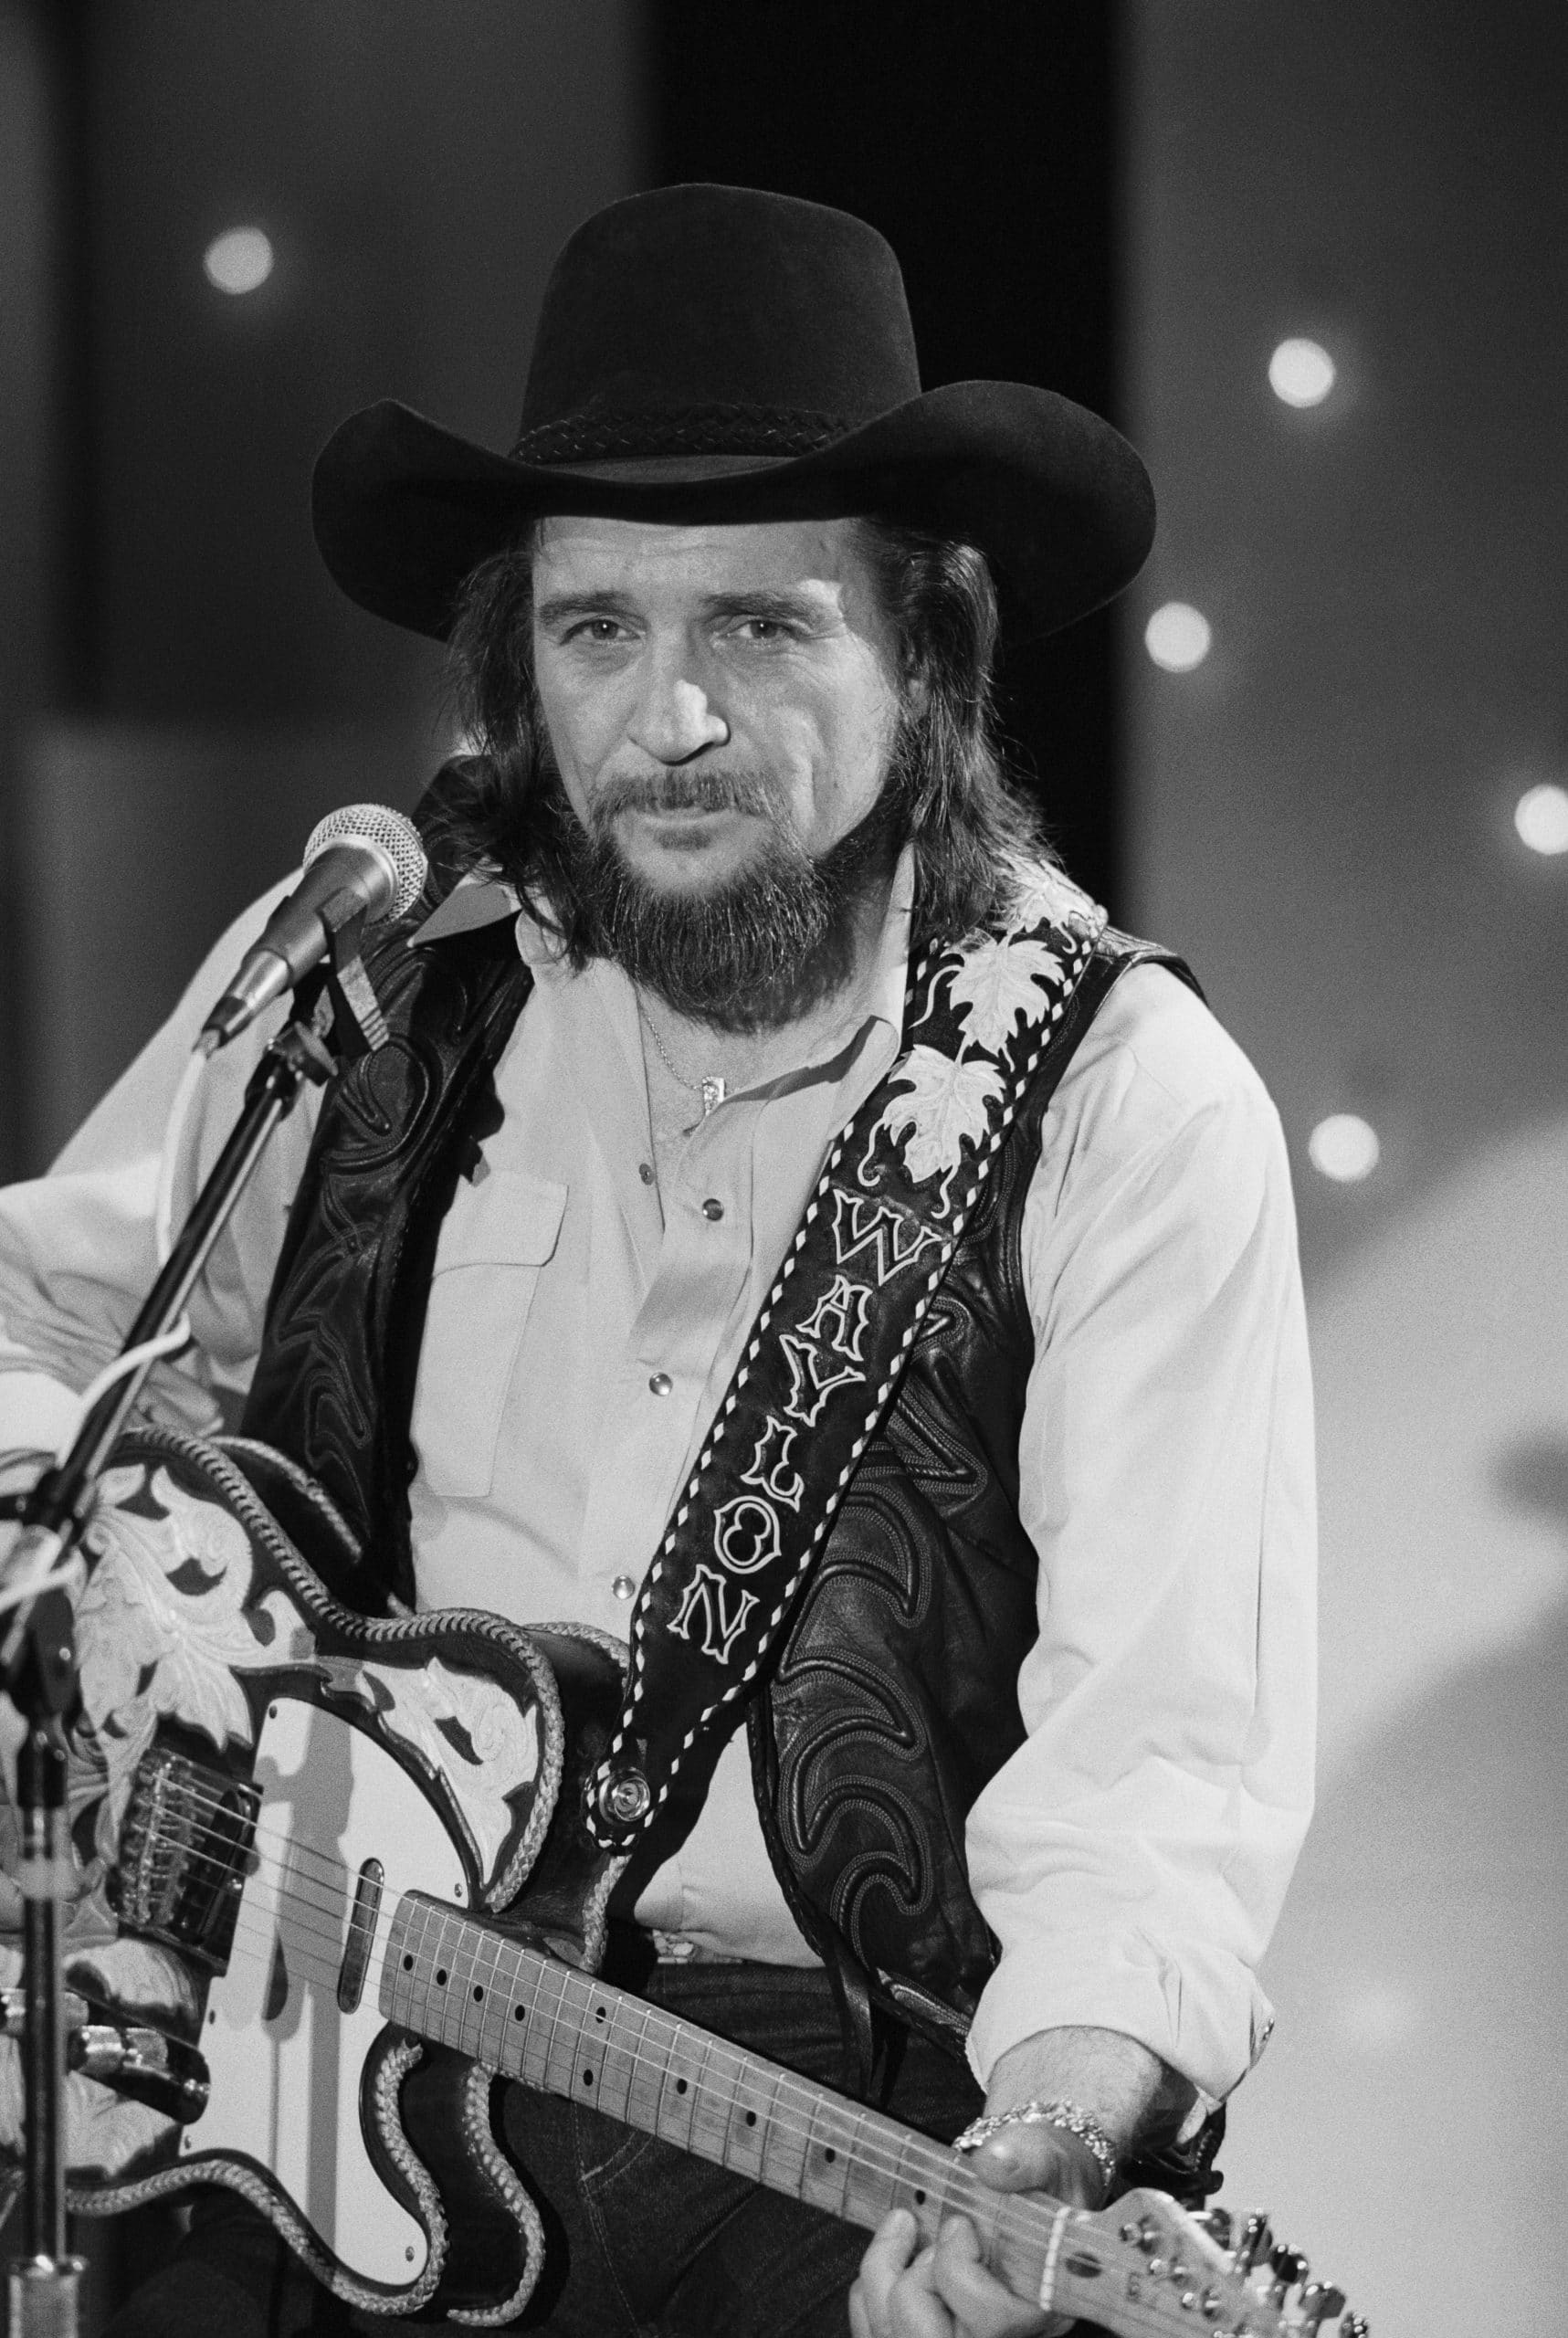 LOS ANGELES - JUNE 2: Country musician Waylon Jennings performs onstage wearing a cowboy hat with a Fender Telecaster electric guitar on June 2, 1983 in Los Angeles, California. (Photo by Michael Ochs Archives/Getty Images)